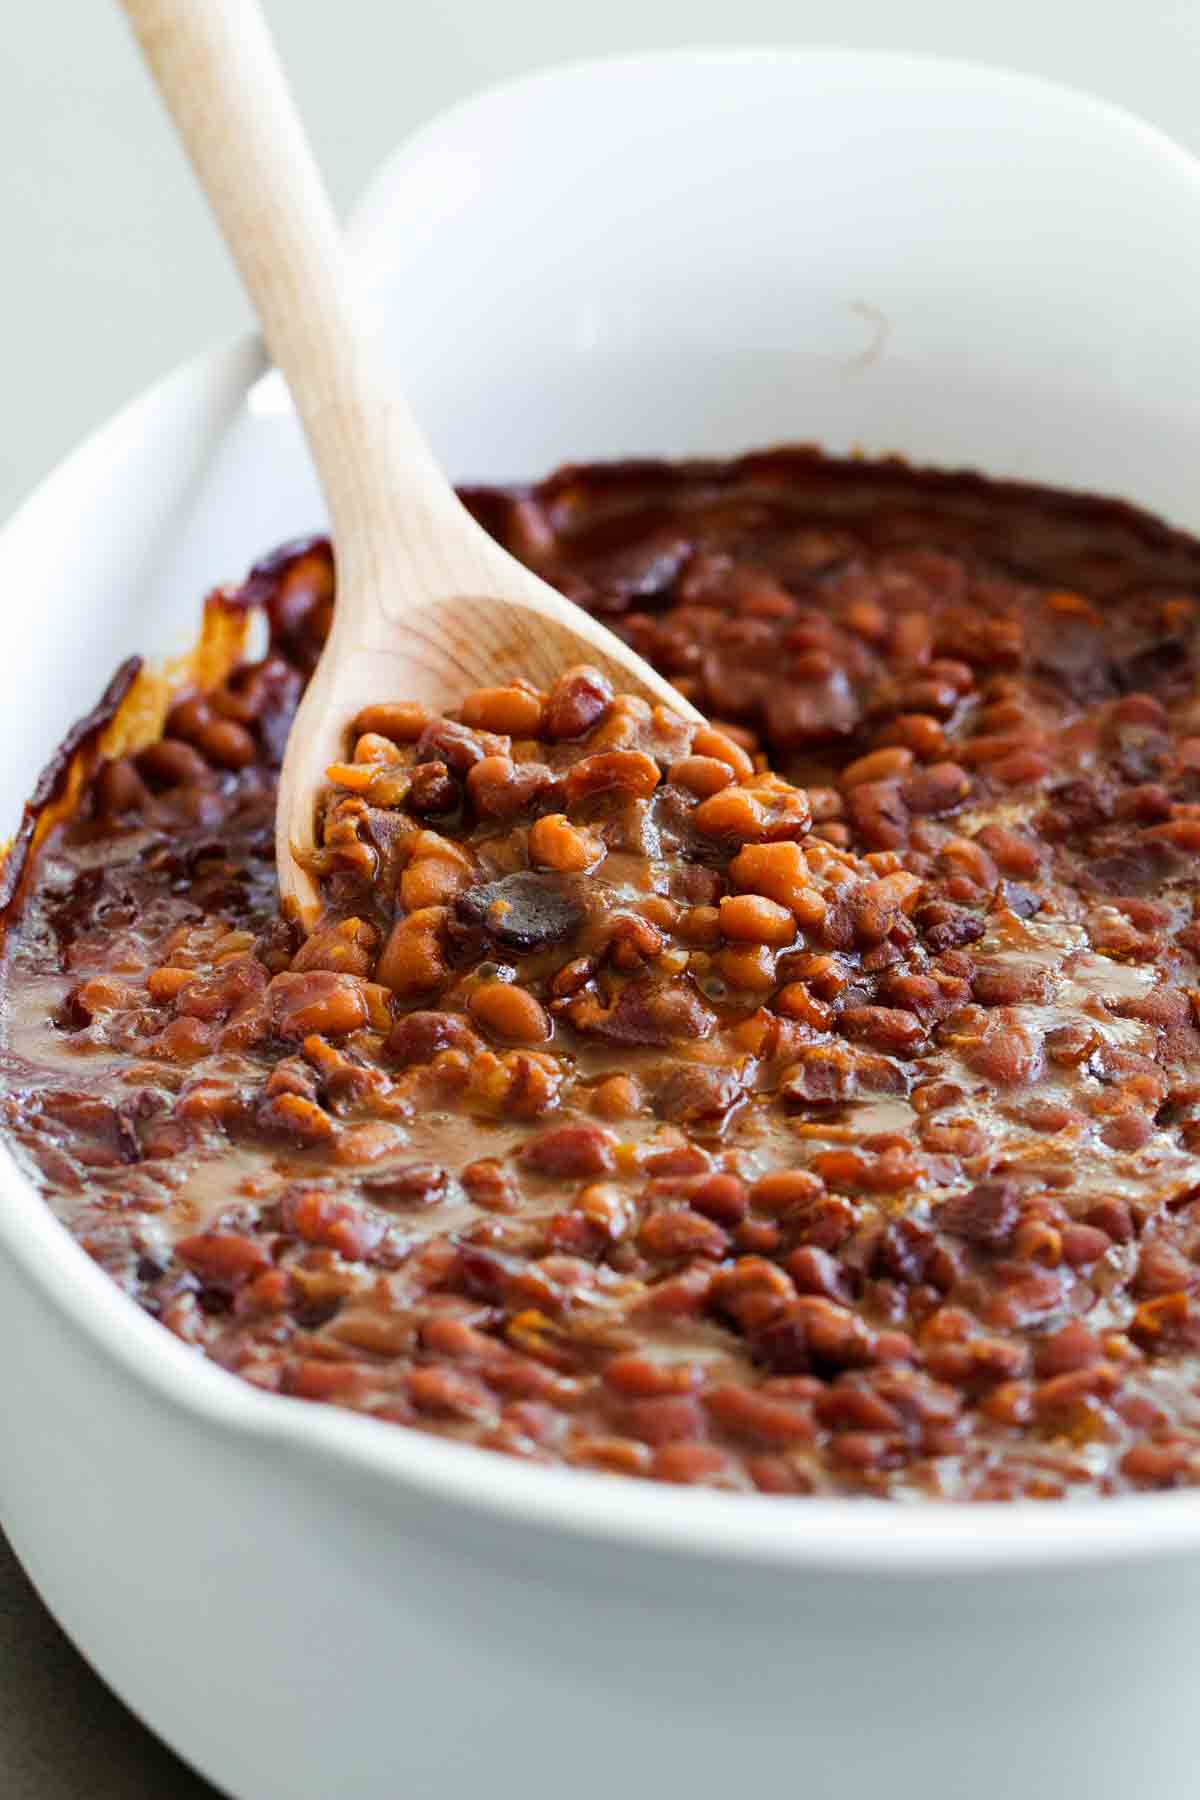 Baked Beans with Bacon - Taste and Tell